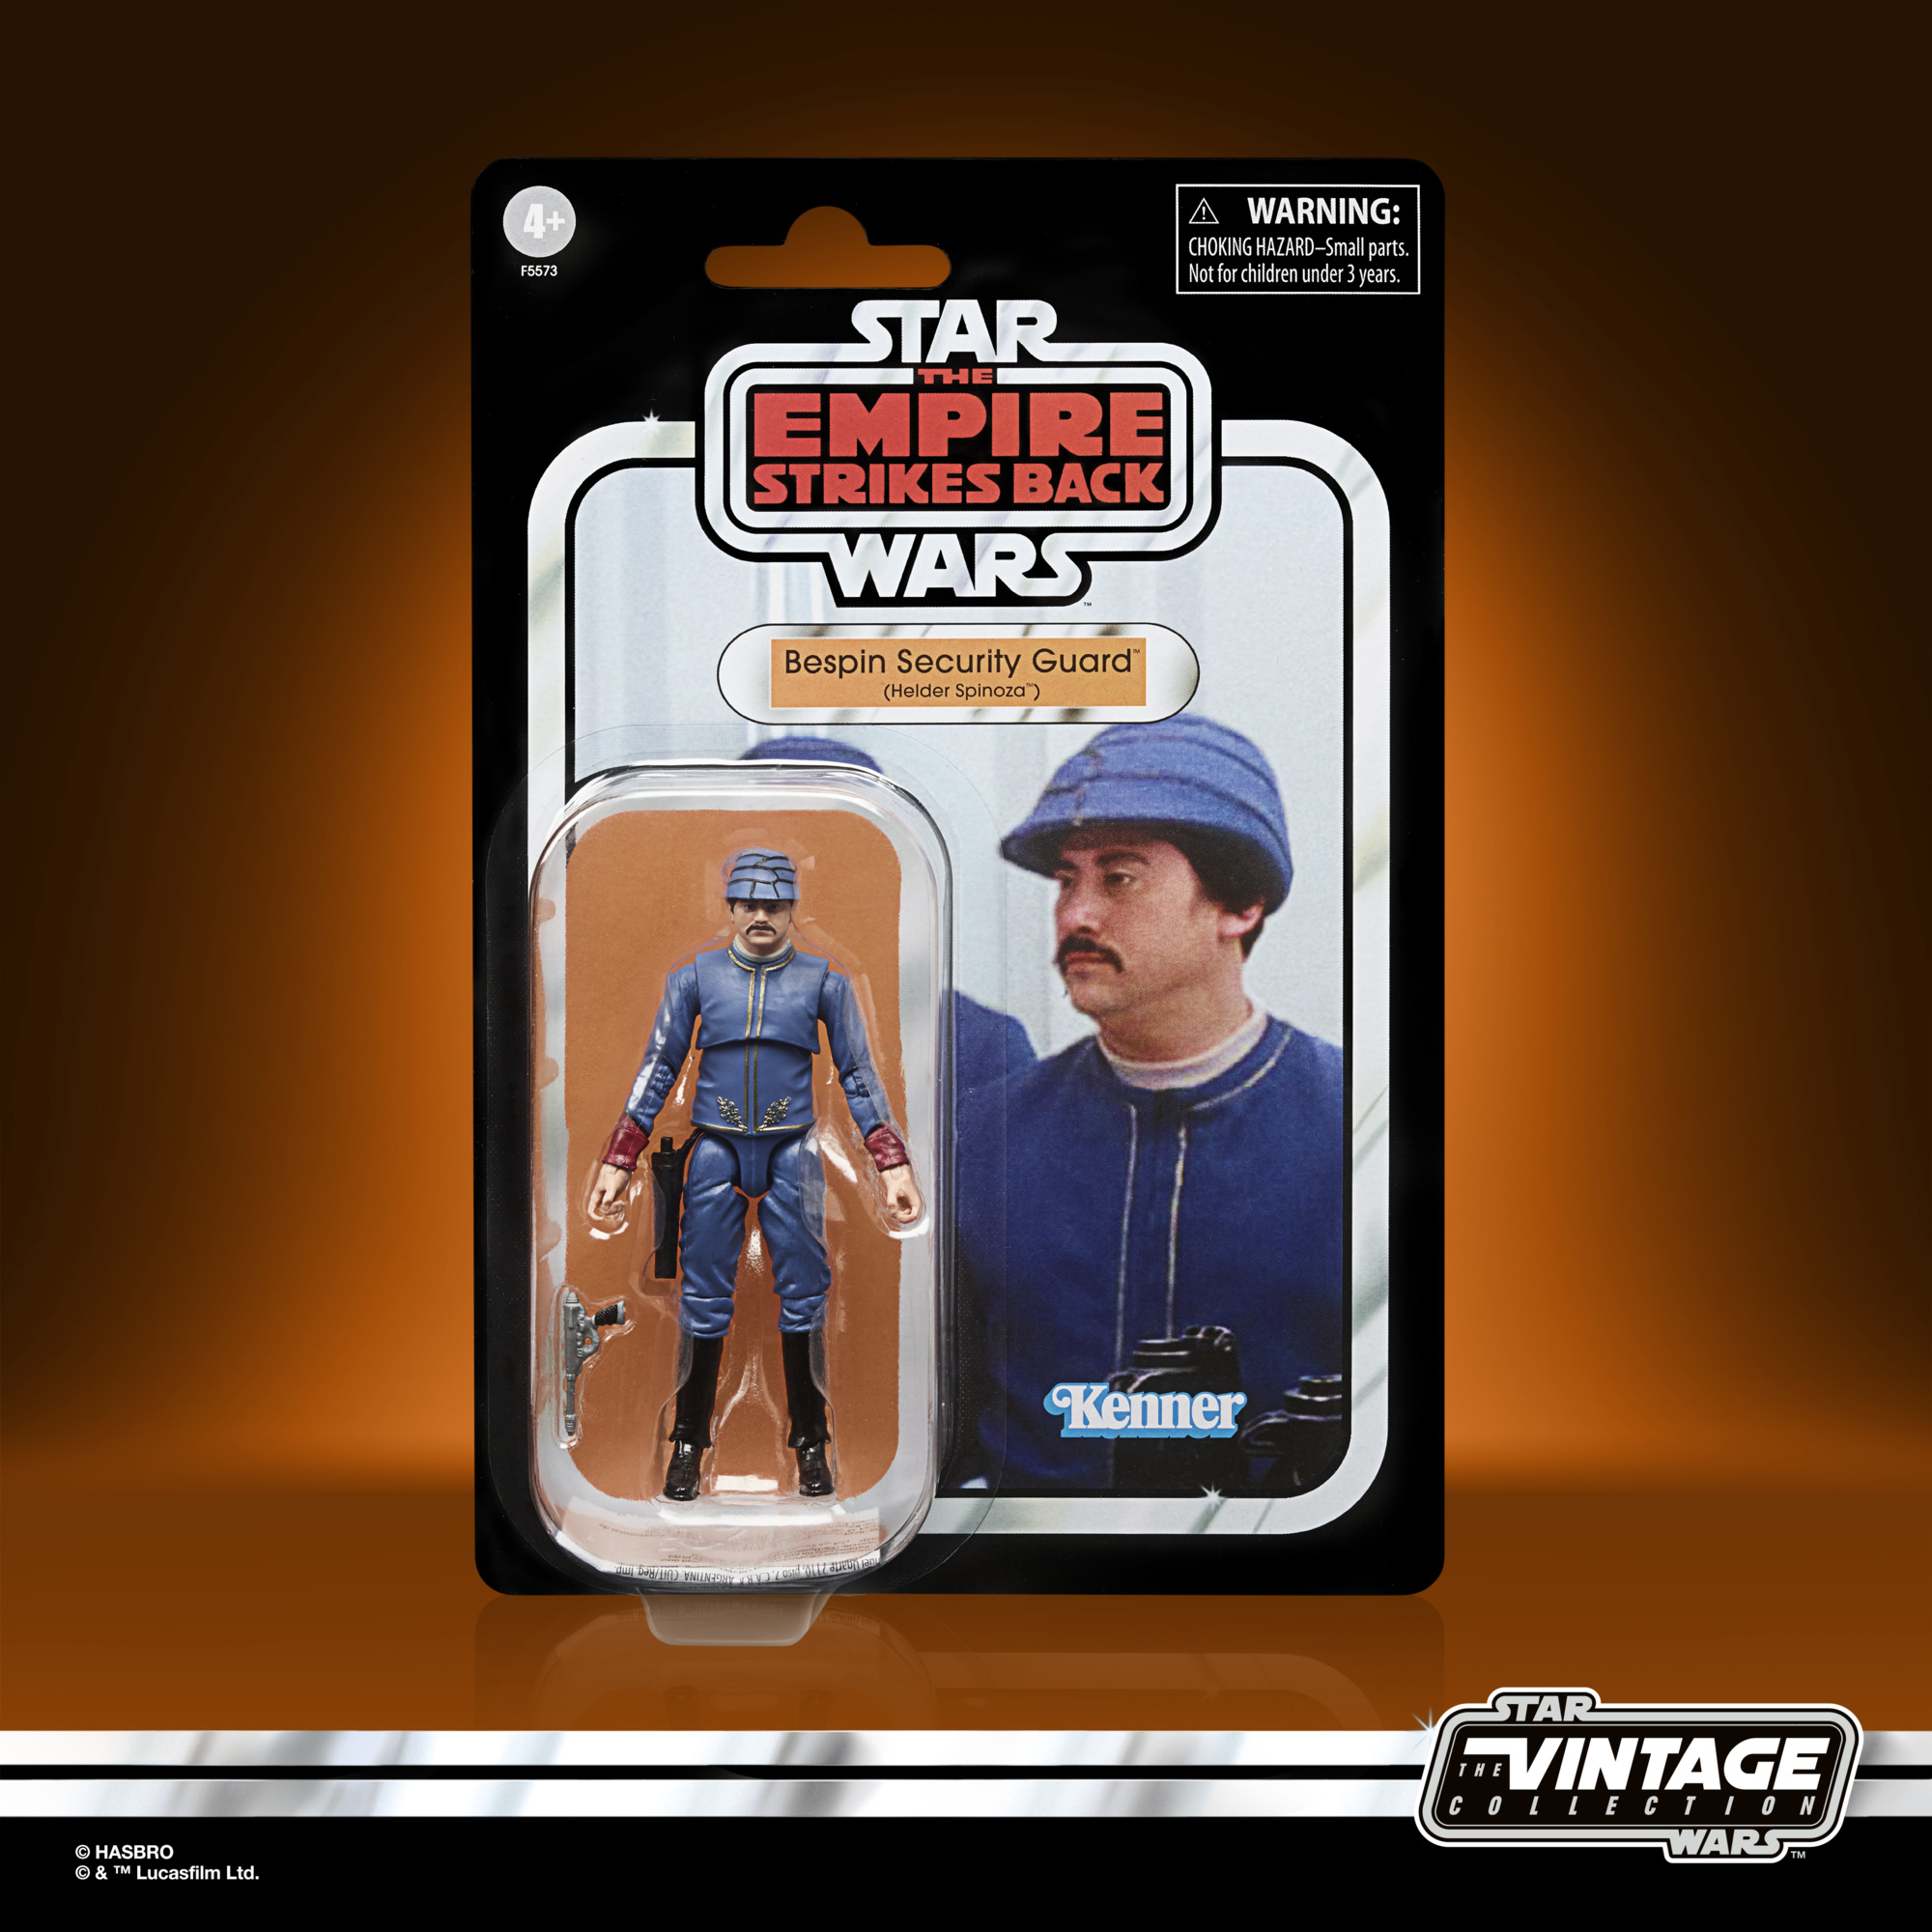 Star Wars The Vintage Collection Bespin Security Guard (Helder Spinoza) F55735L61 5010993968305